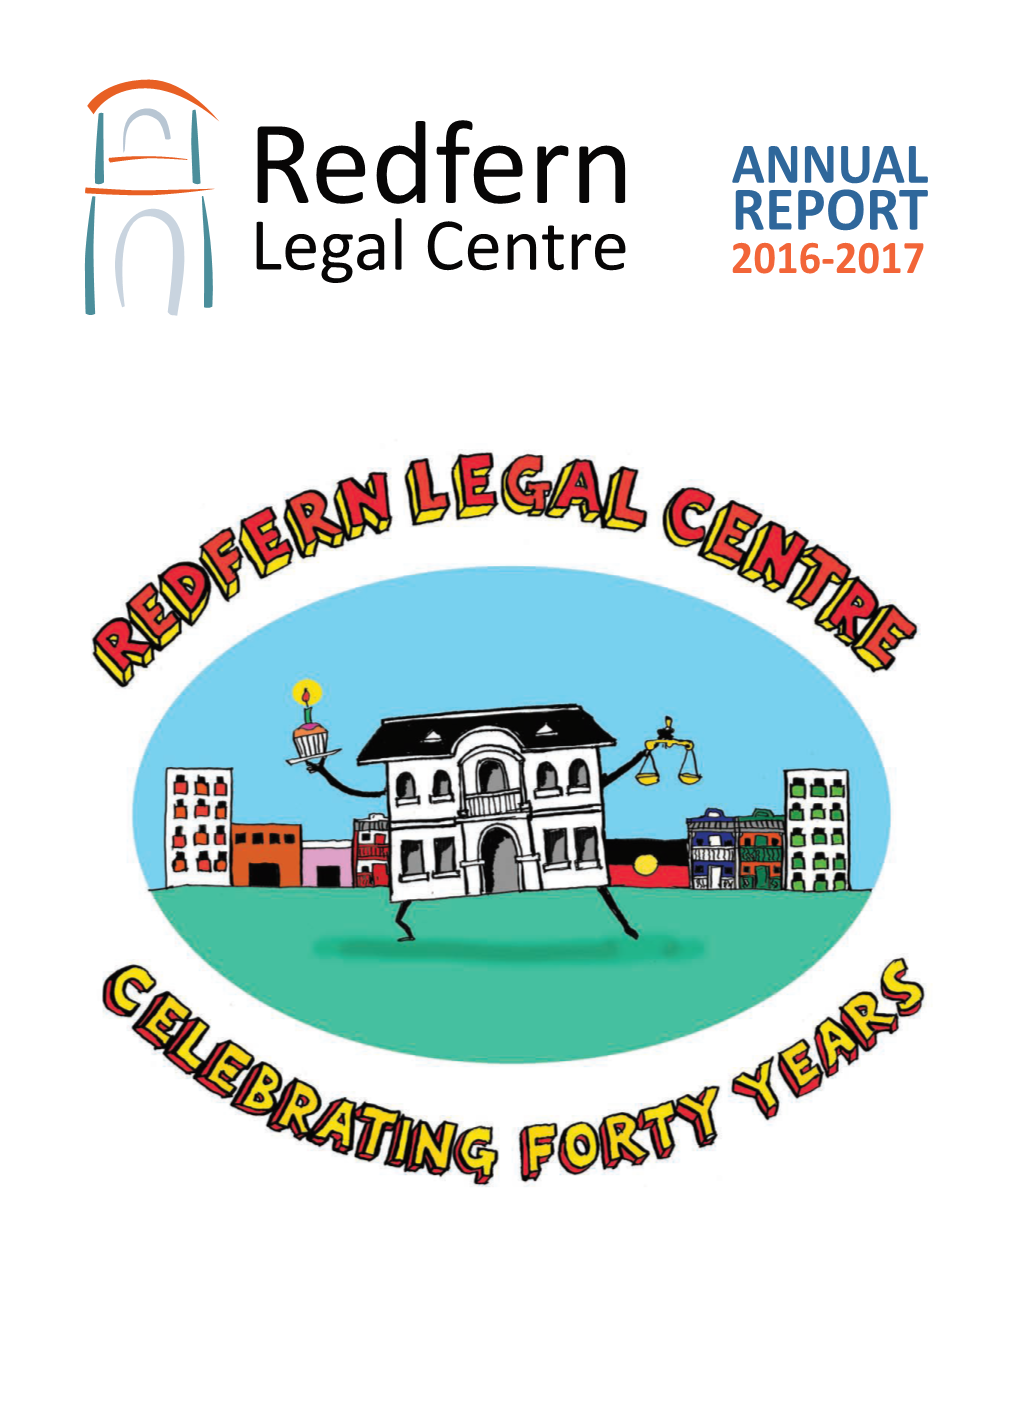 ANNUAL REPORT 2016-2017 Redfern Legal Centre – Celebrating 40 Years This Is a Historic Year for Redfern Legal Centre, As We Commemorate Our 40Th Anniversary